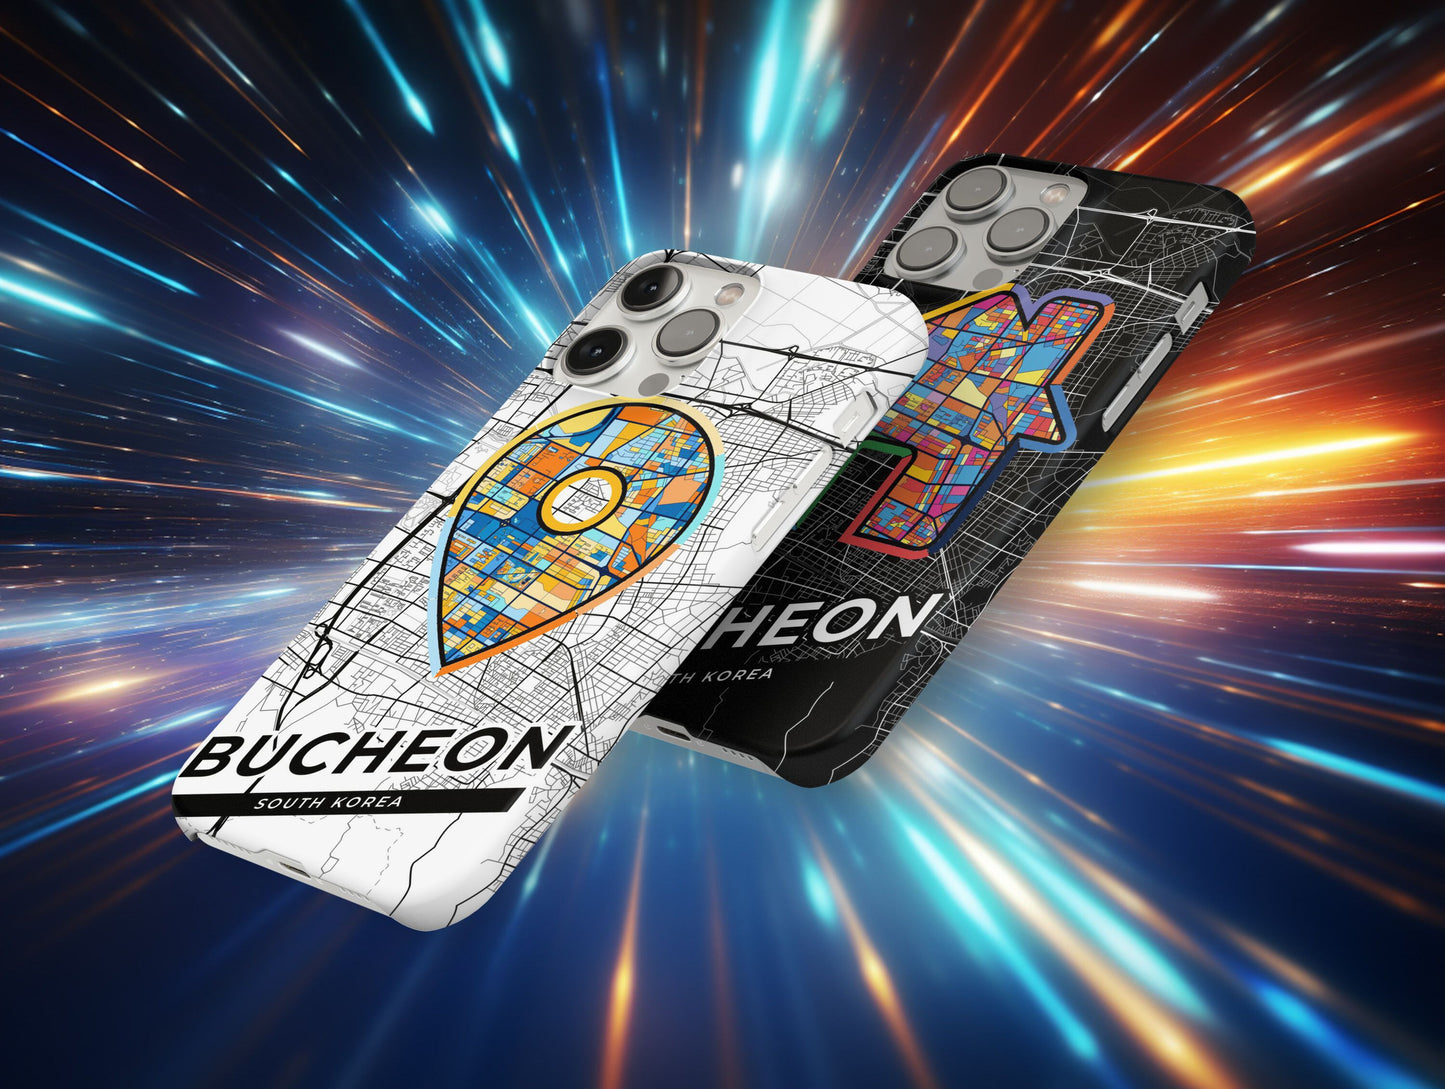 Bucheon South Korea slim phone case with colorful icon. Birthday, wedding or housewarming gift. Couple match cases.